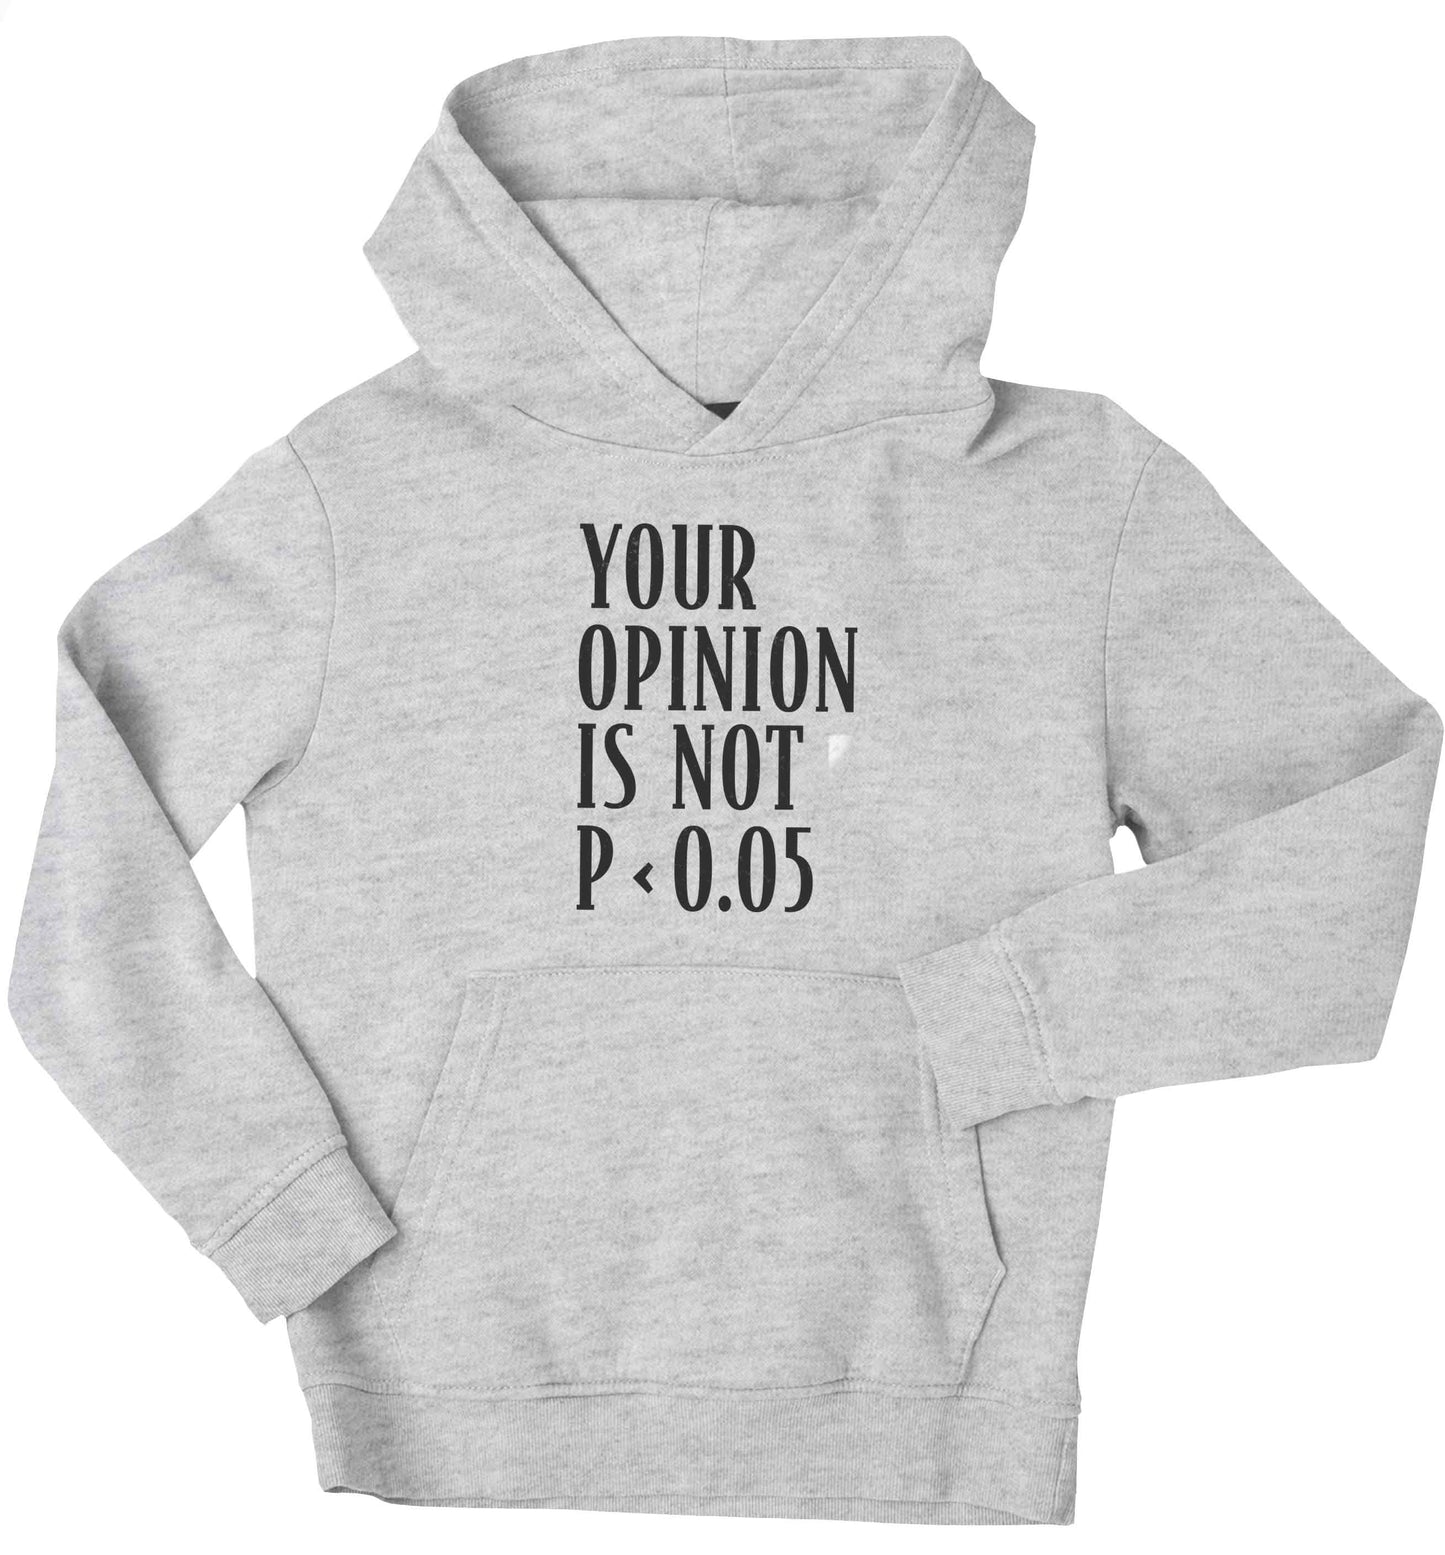 Your opinion is not P < 0.05children's grey hoodie 12-13 Years